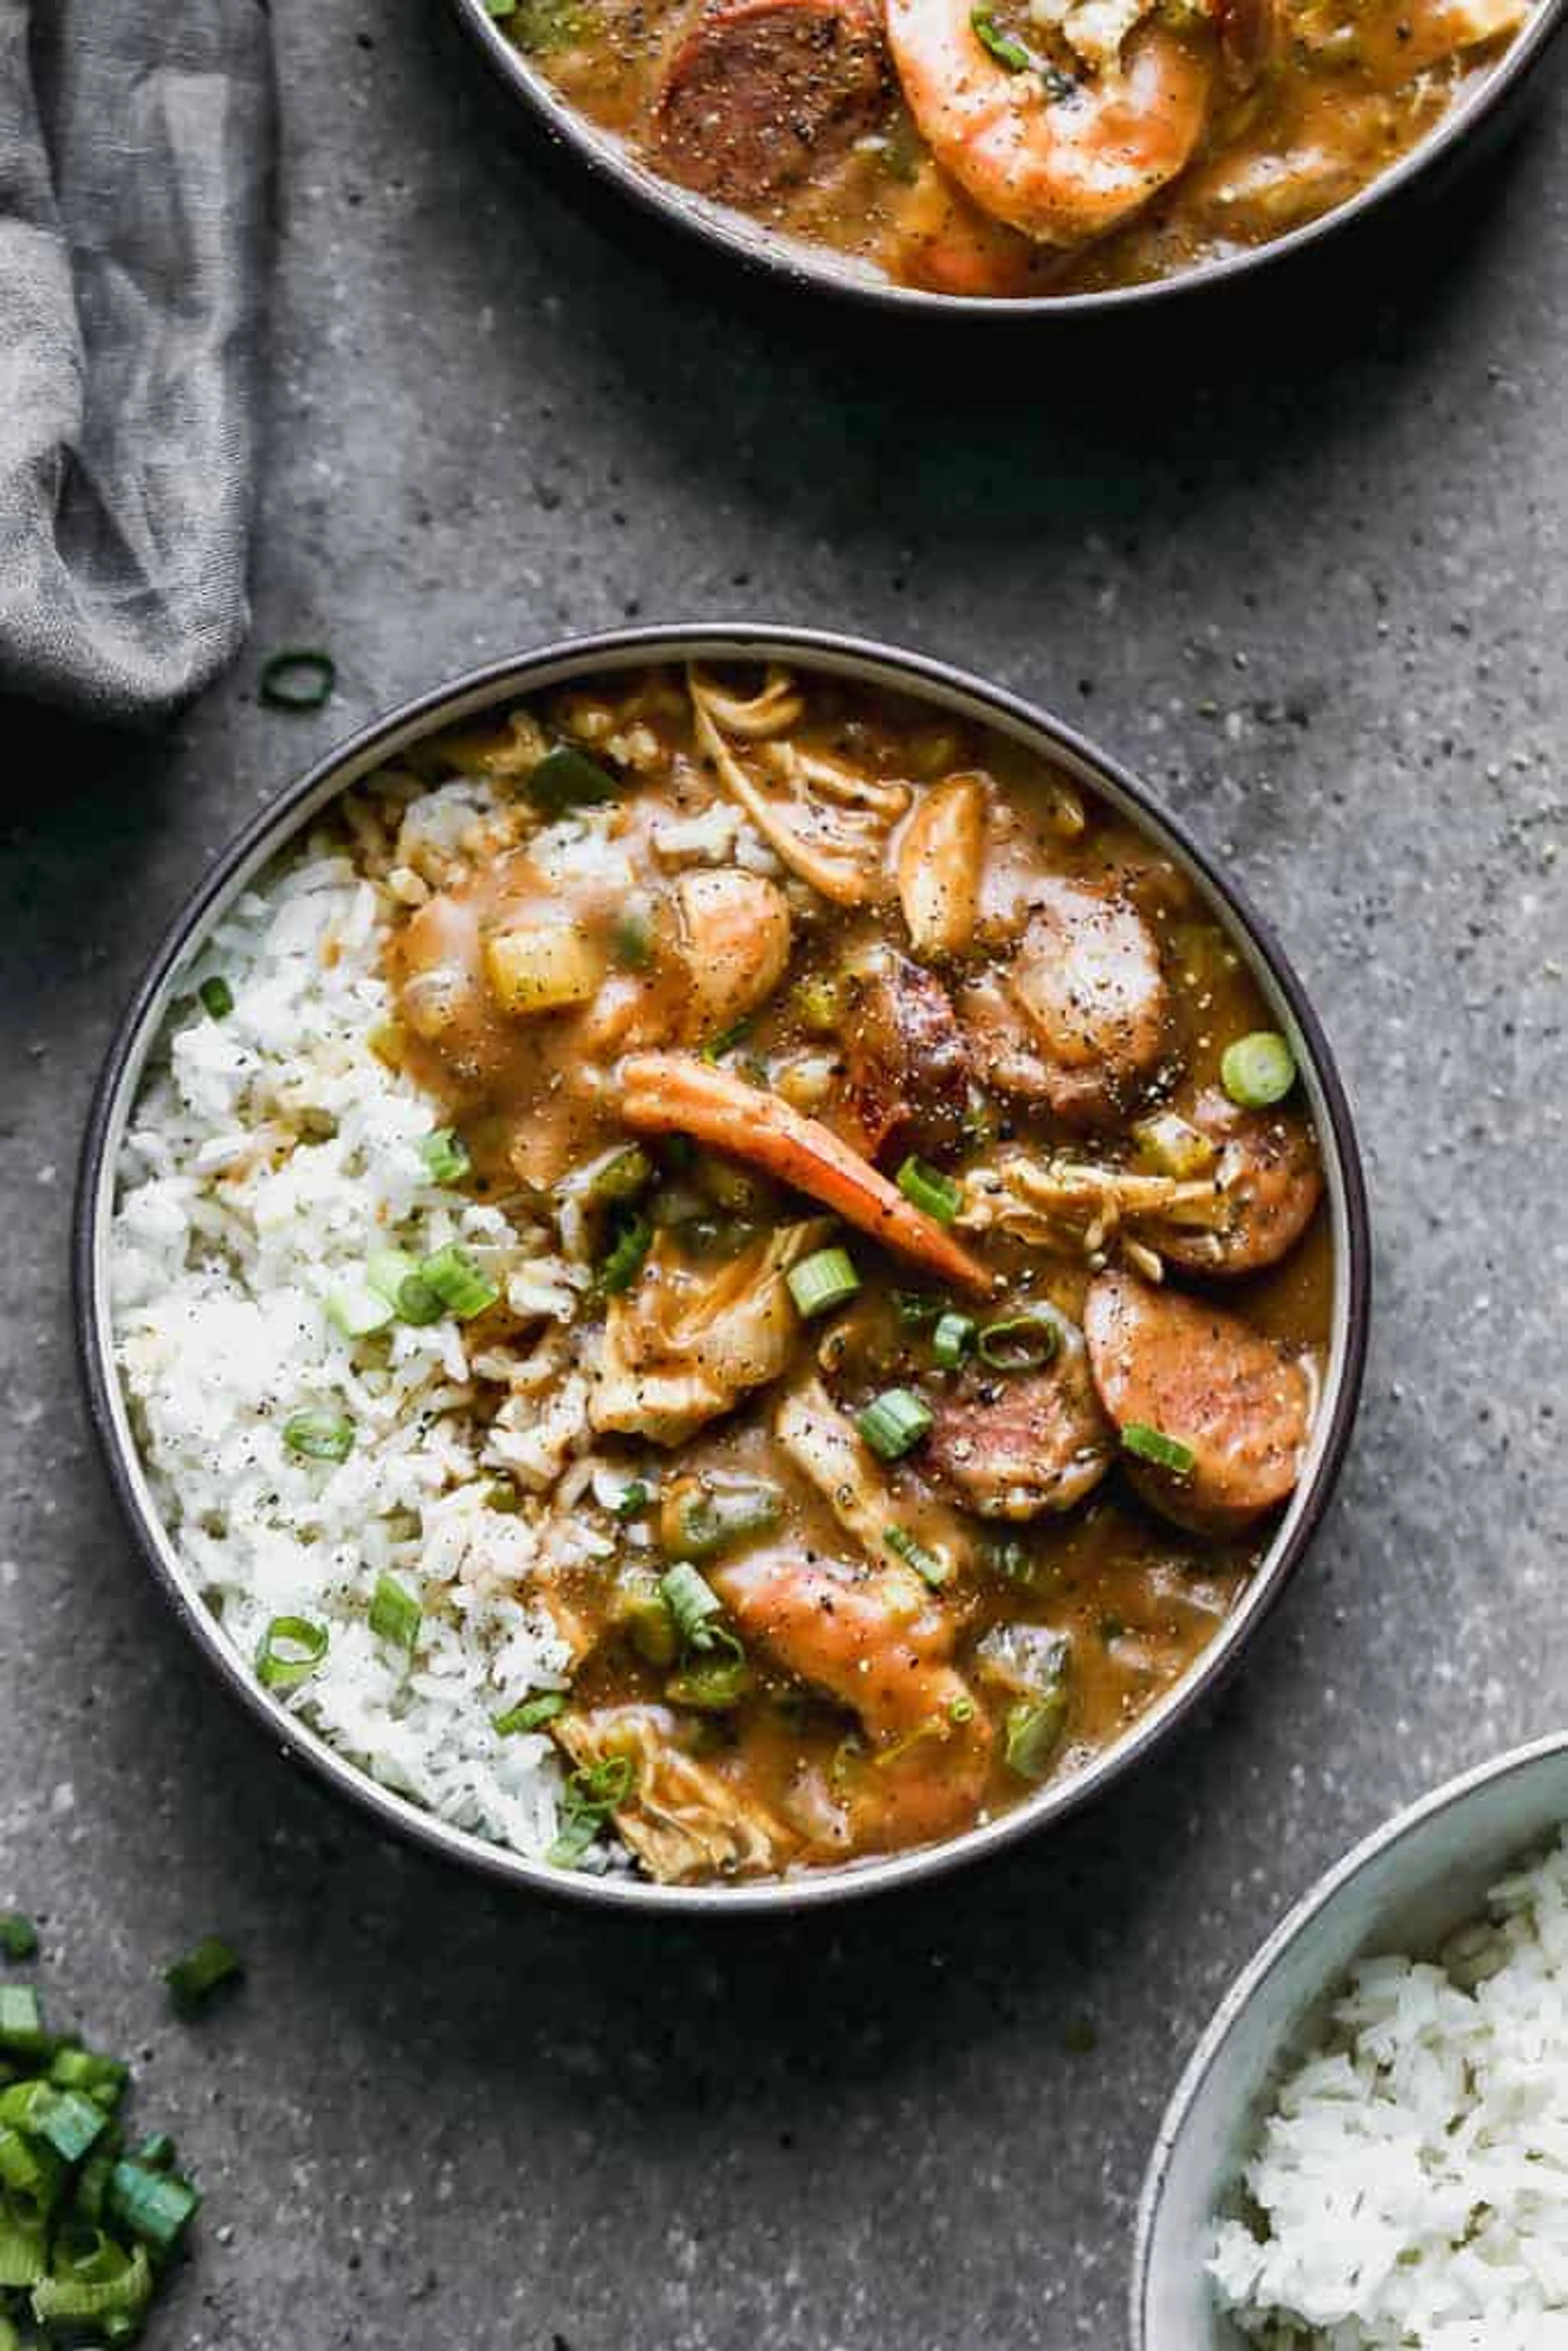 Authentic New Orleans Style Gumbo